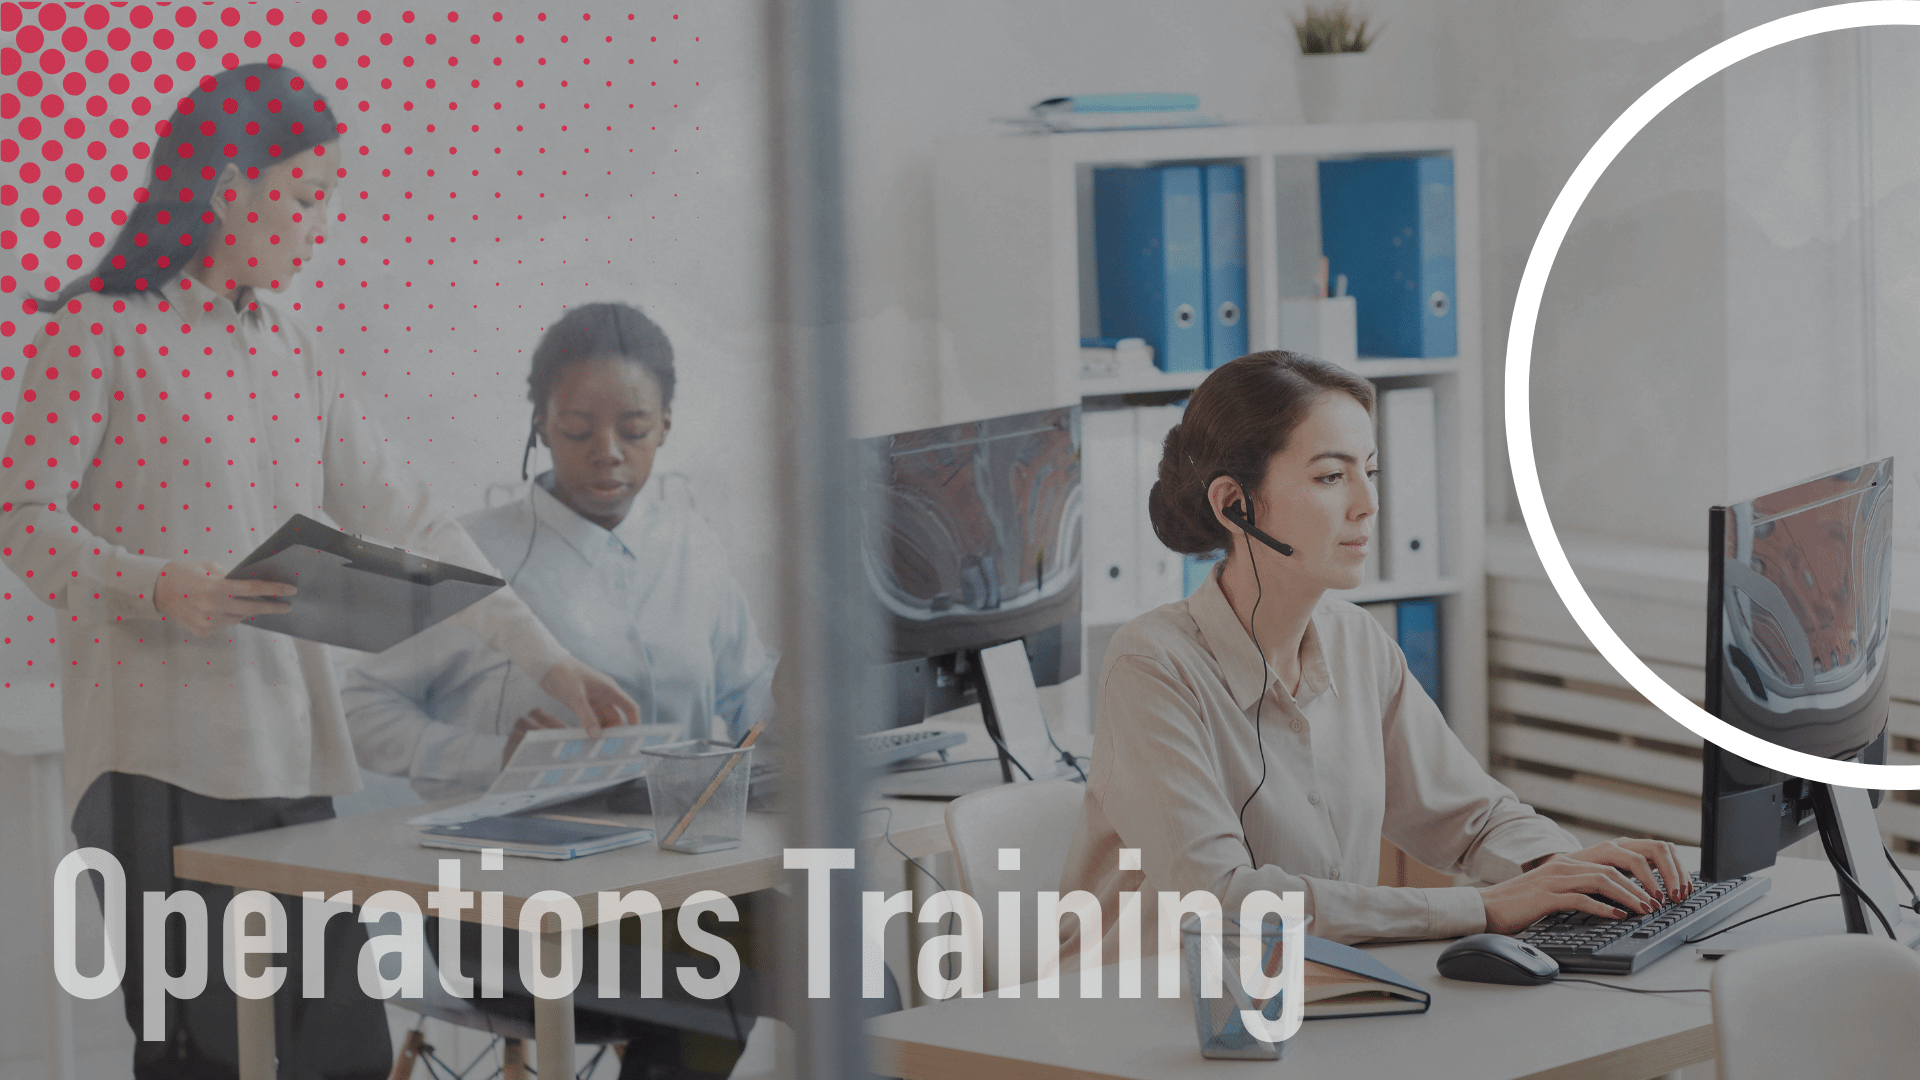 Operations Training Program provides specialized training tailored to specific roles.